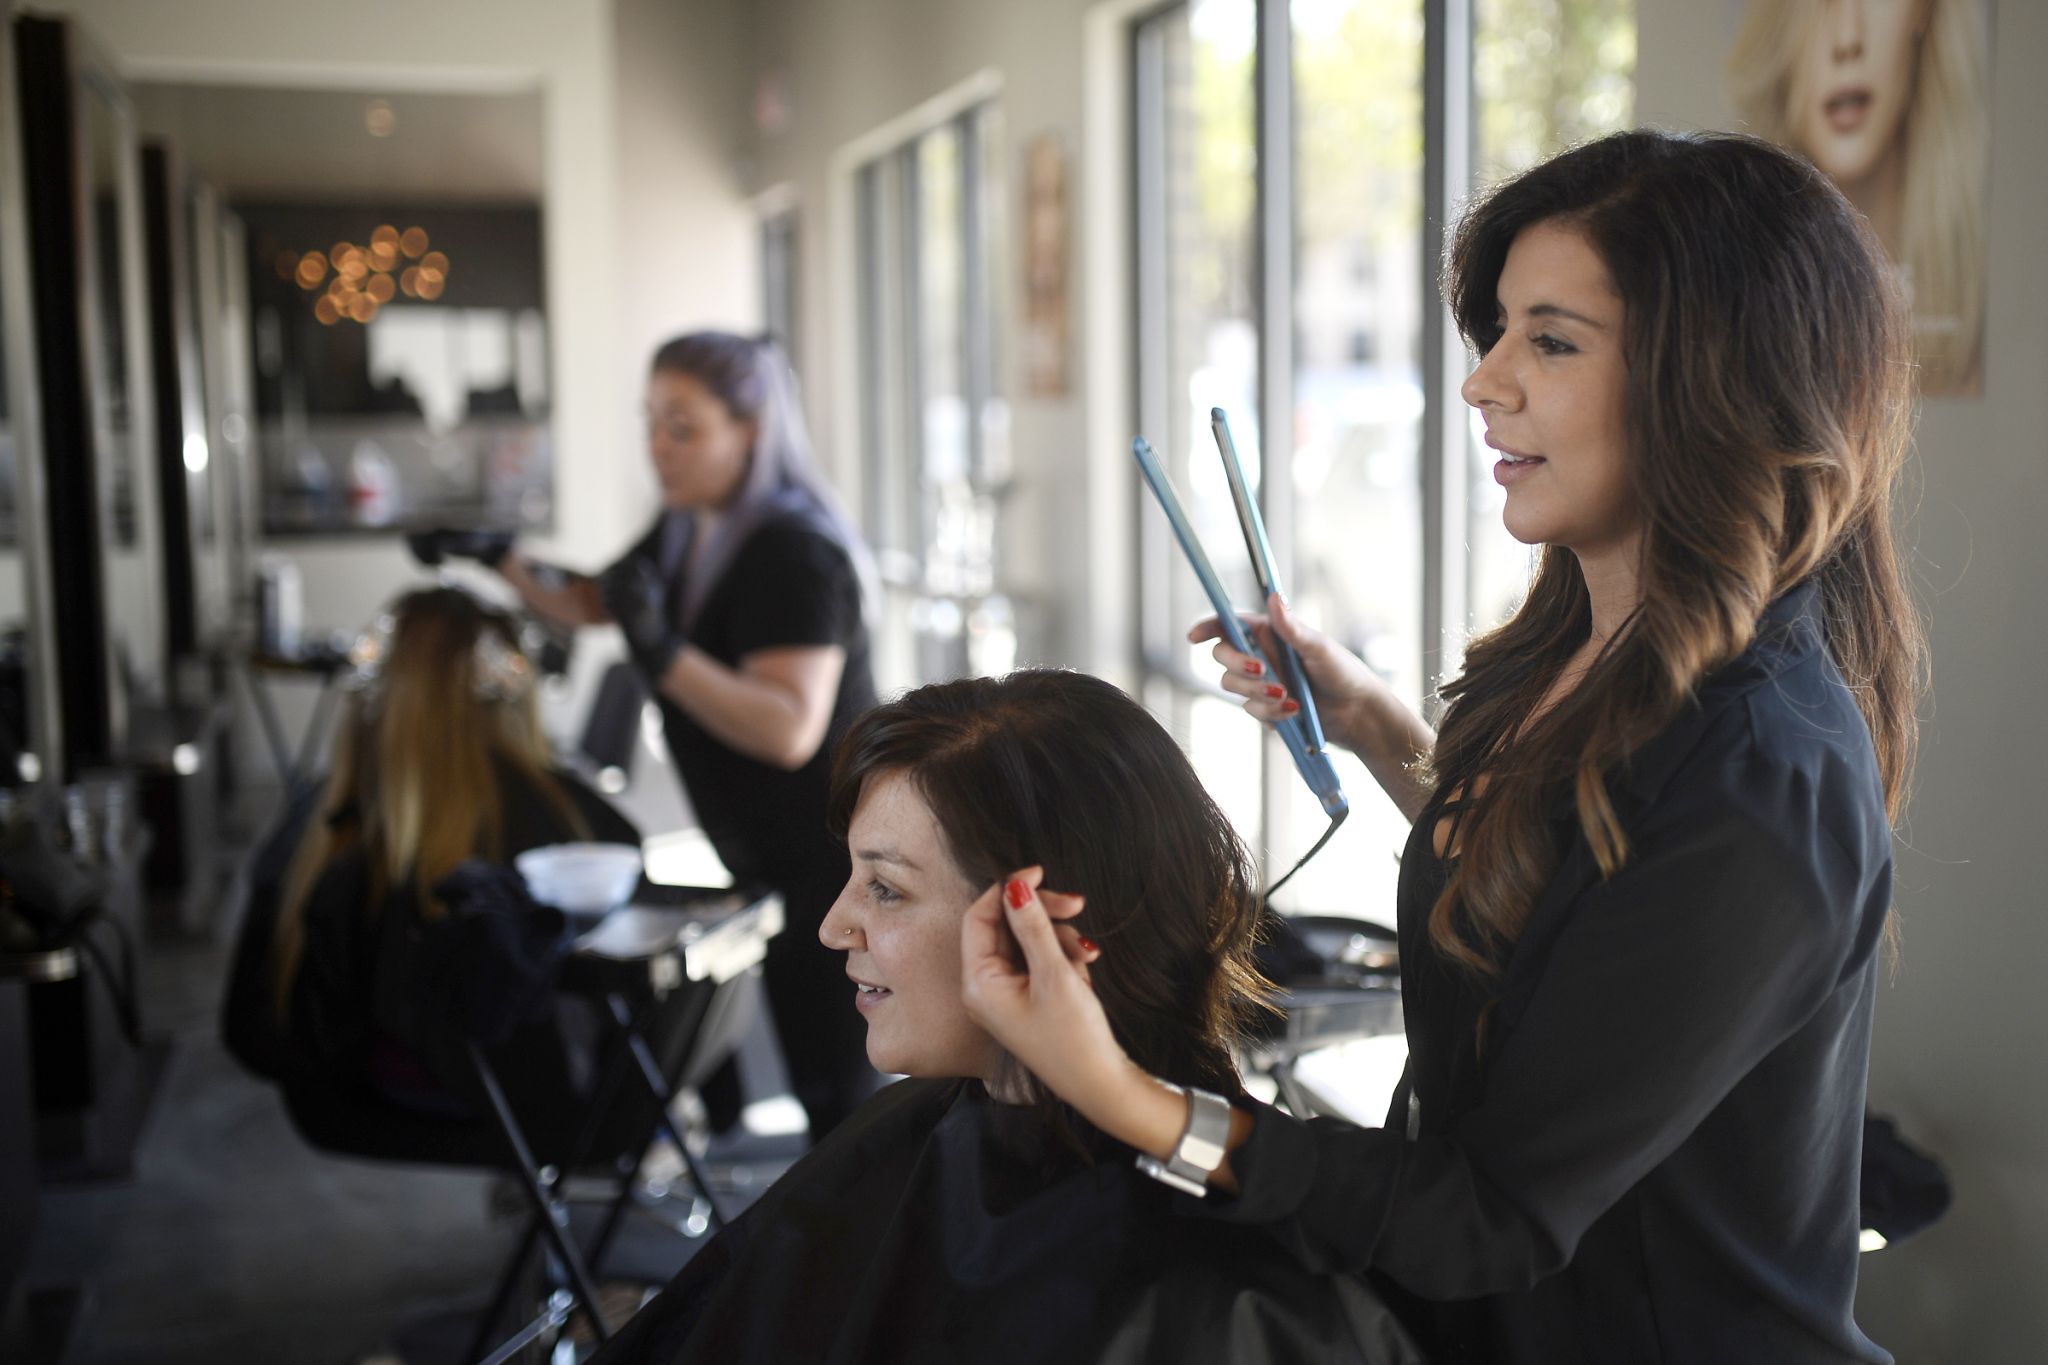 Owner of Halo Hair has reasons to celebrate